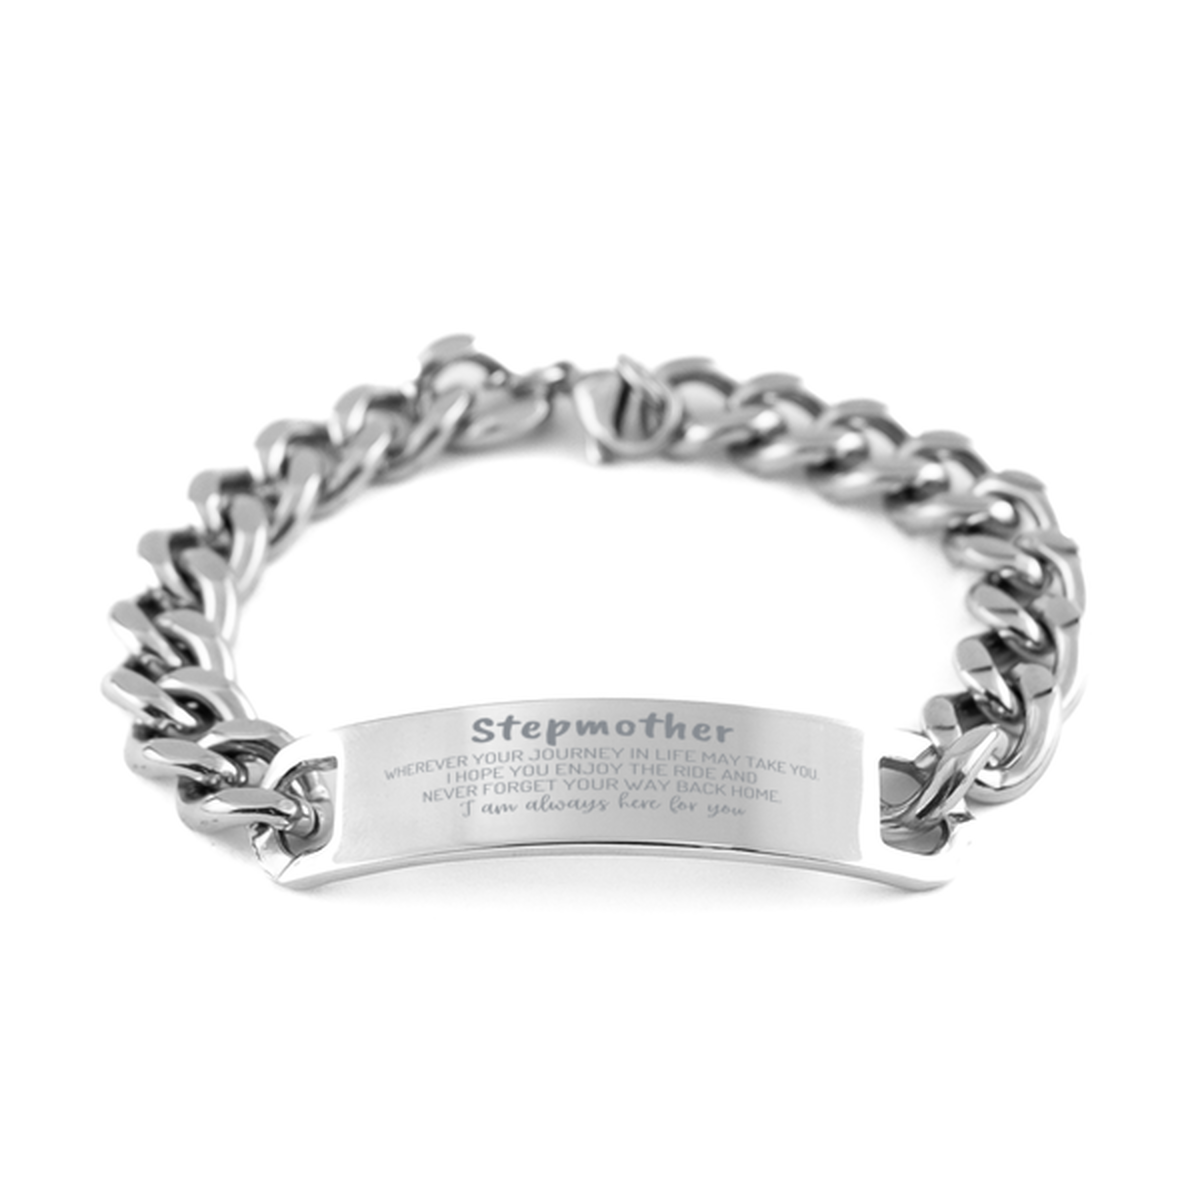 Stepmother wherever your journey in life may take you, I am always here for you Stepmother Cuban Chain Stainless Steel Bracelet, Awesome Christmas Gifts For Stepmother, Stepmother Birthday Gifts for Men Women Family Loved One